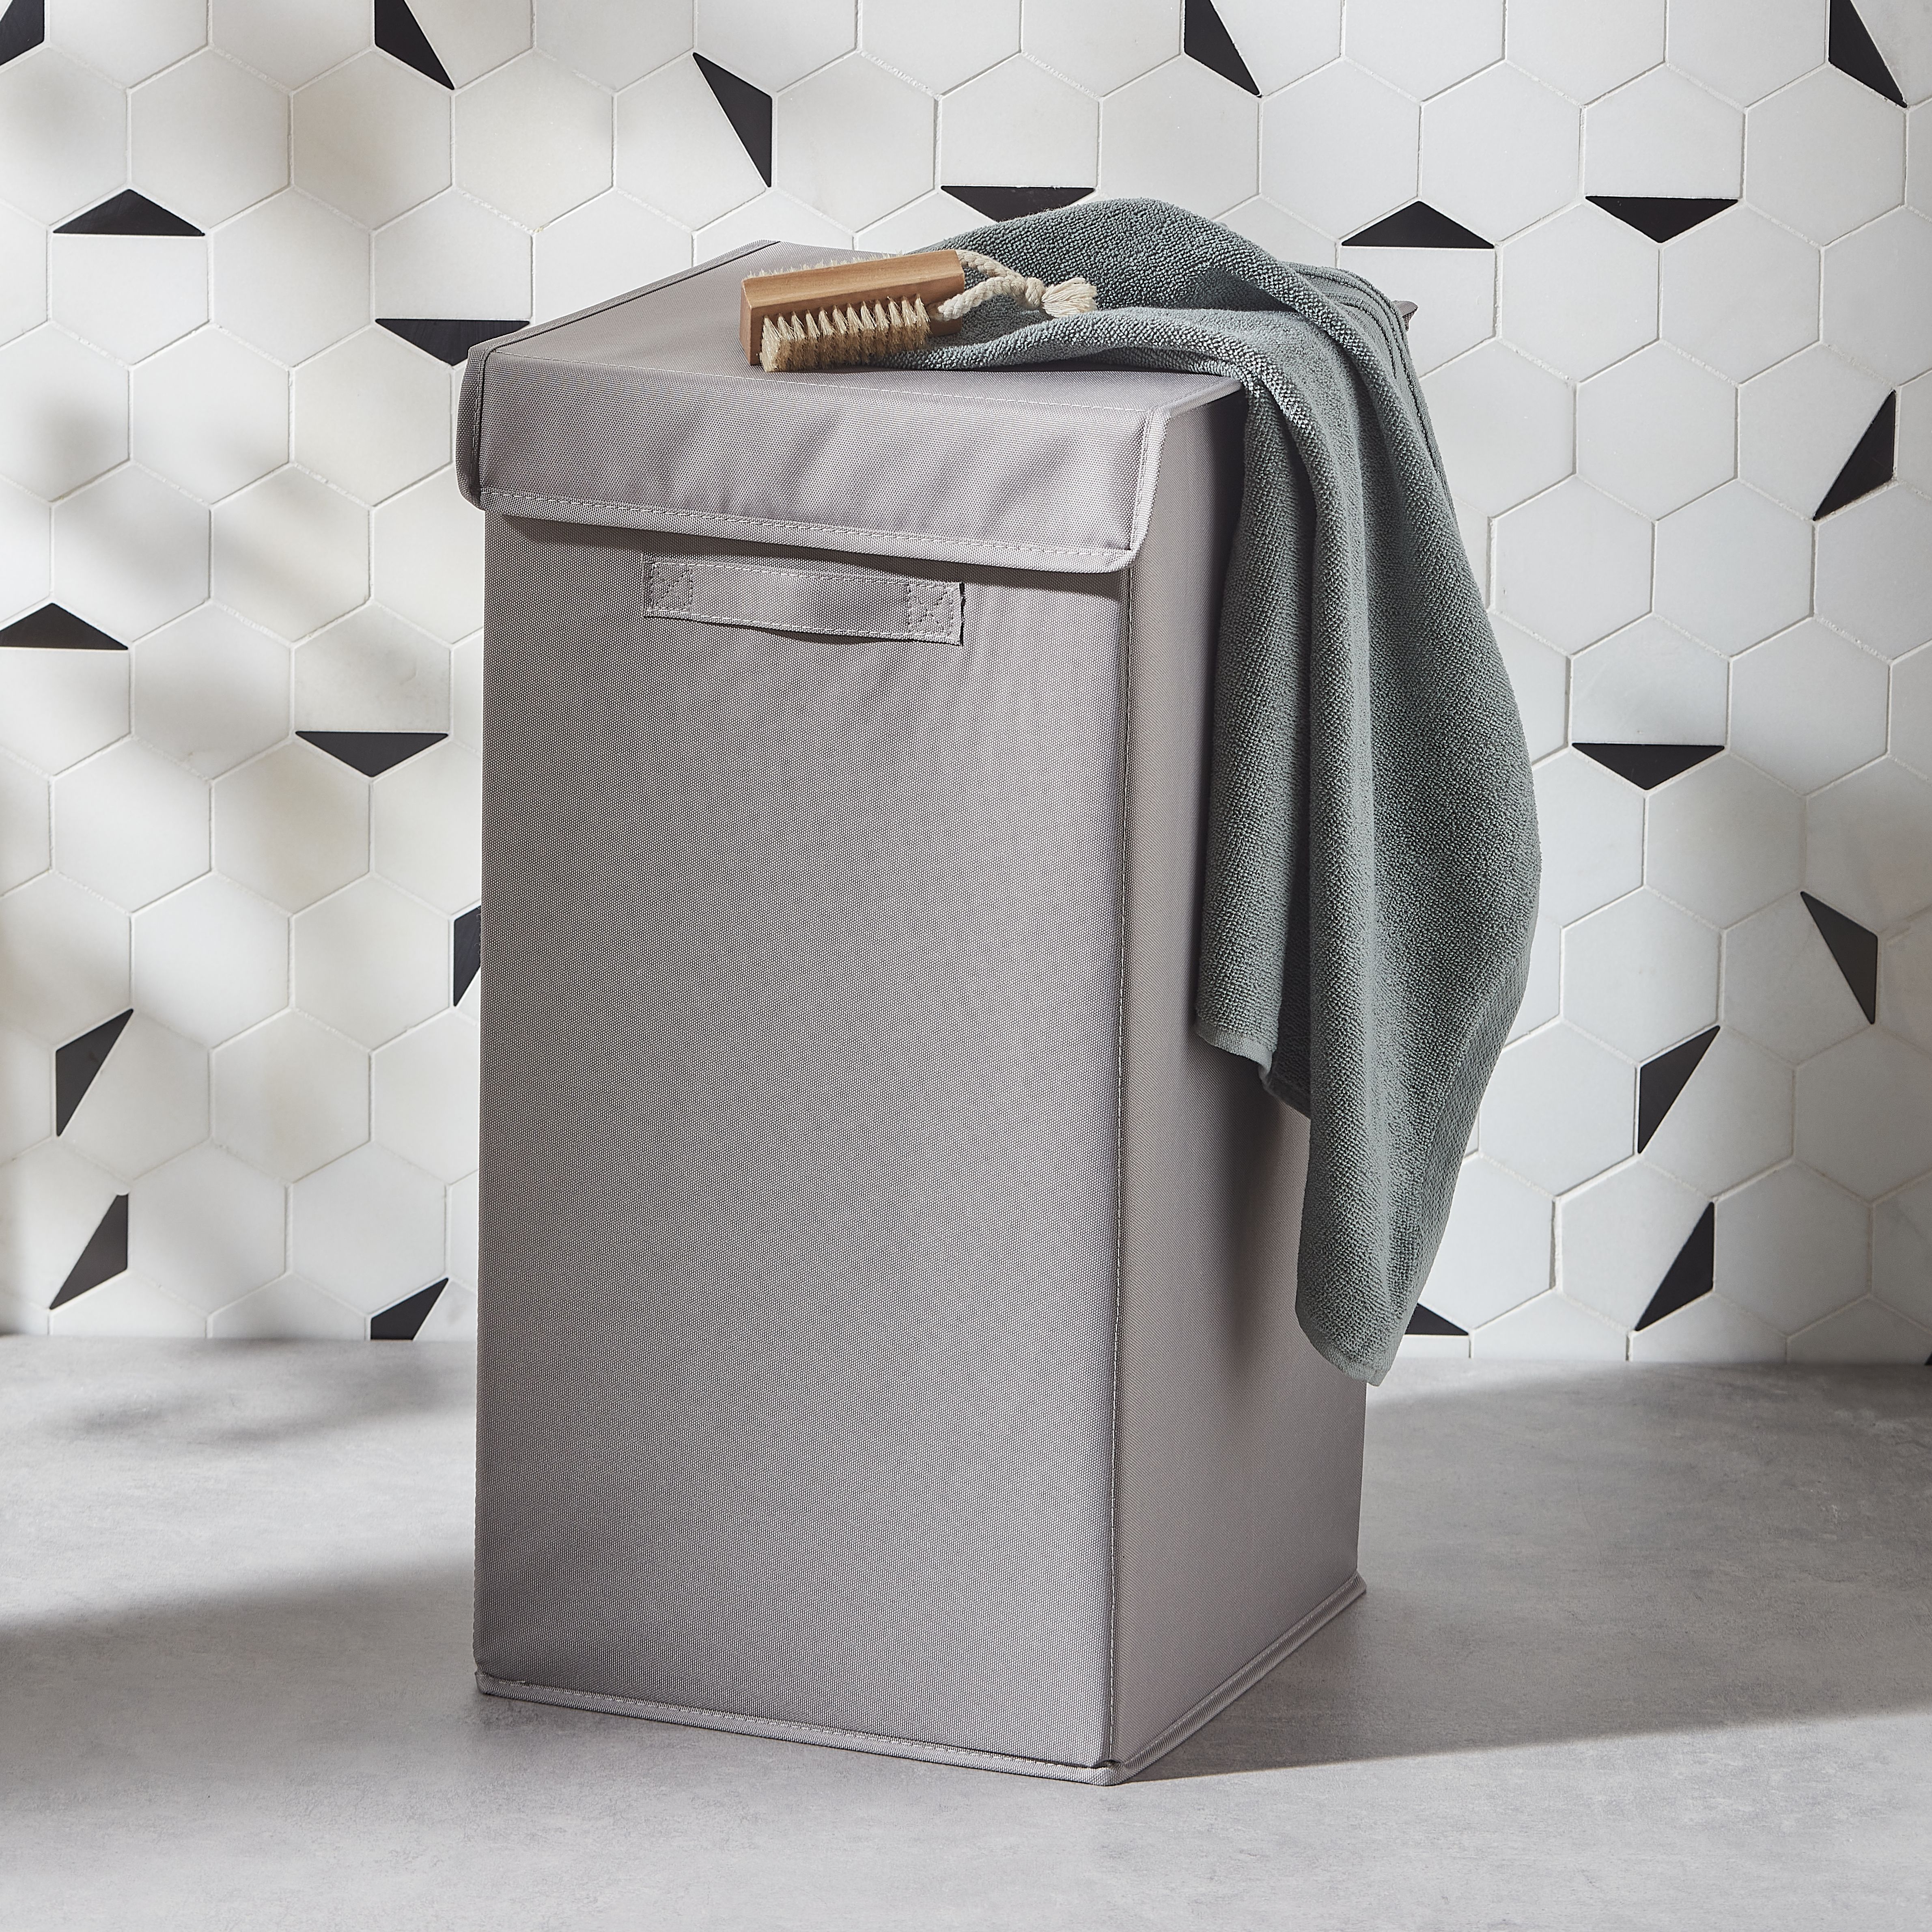 GoodHome Drina Taupe Polyester (PES) & polypropylene (PP) Laundry bin, 52L